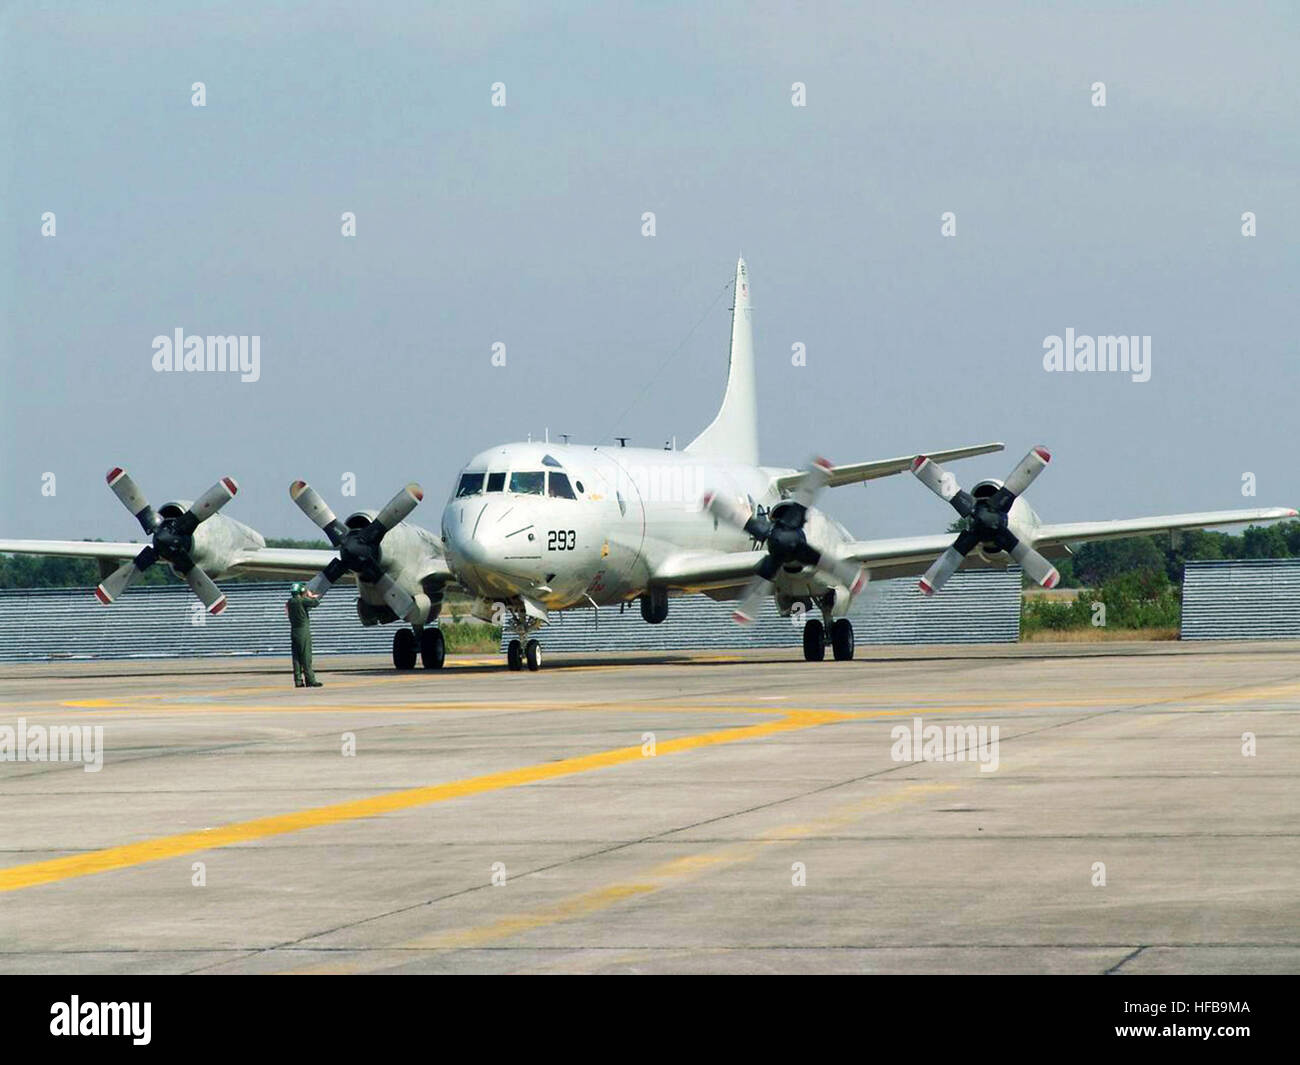 A US Navy (USN) EP-3C Orion surveillance aircraft assigned to the 'Tigers' of Patrol Squadron 8 (VP-8) is marshaled into position after arriving at Utapoa, Royal Thai Air Force Base (RTAFB), Thailand. The aircraft and its crew members are deployed to Thailand to conduct survey operations in support of disaster relief after a Tsunami hit coastal regions throughout Southeast Asia. EP-3C VP-8 U-Tapao Dec2004 Stock Photo